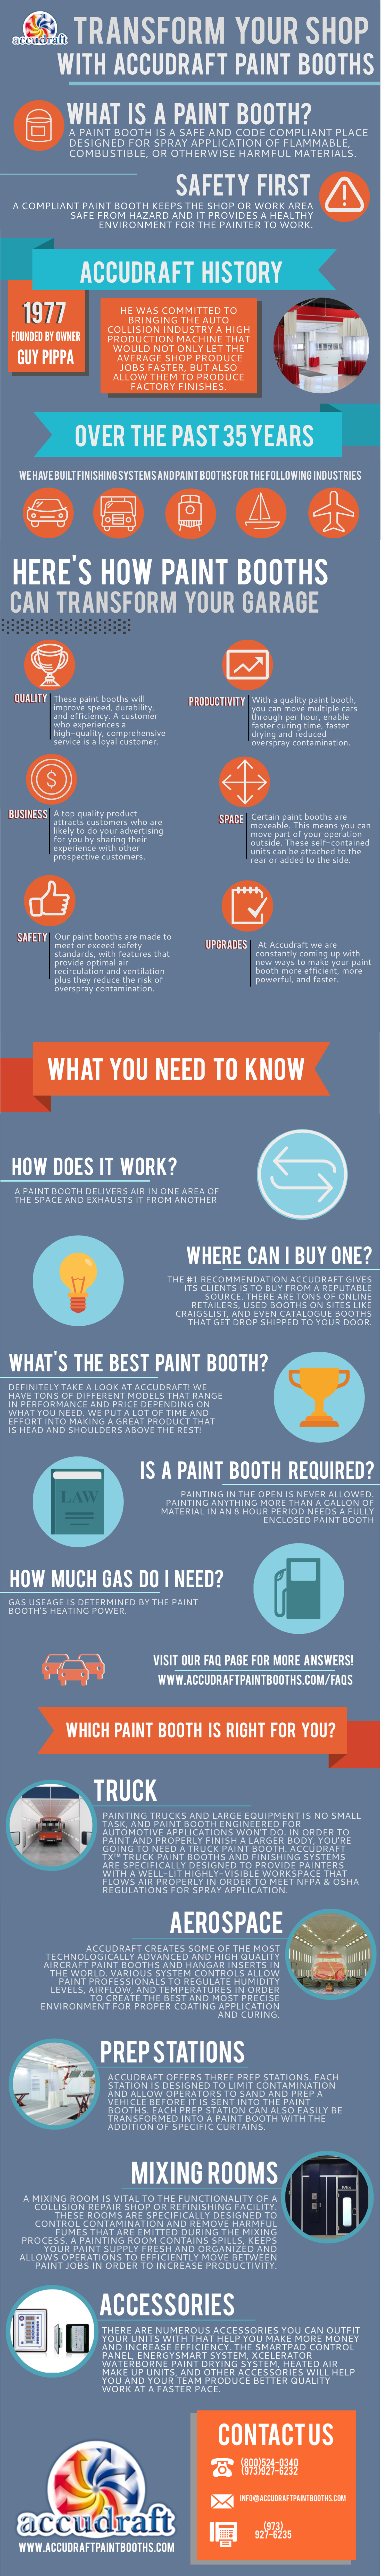 Accudraft Paint Booths [INFOGRAPHIC]